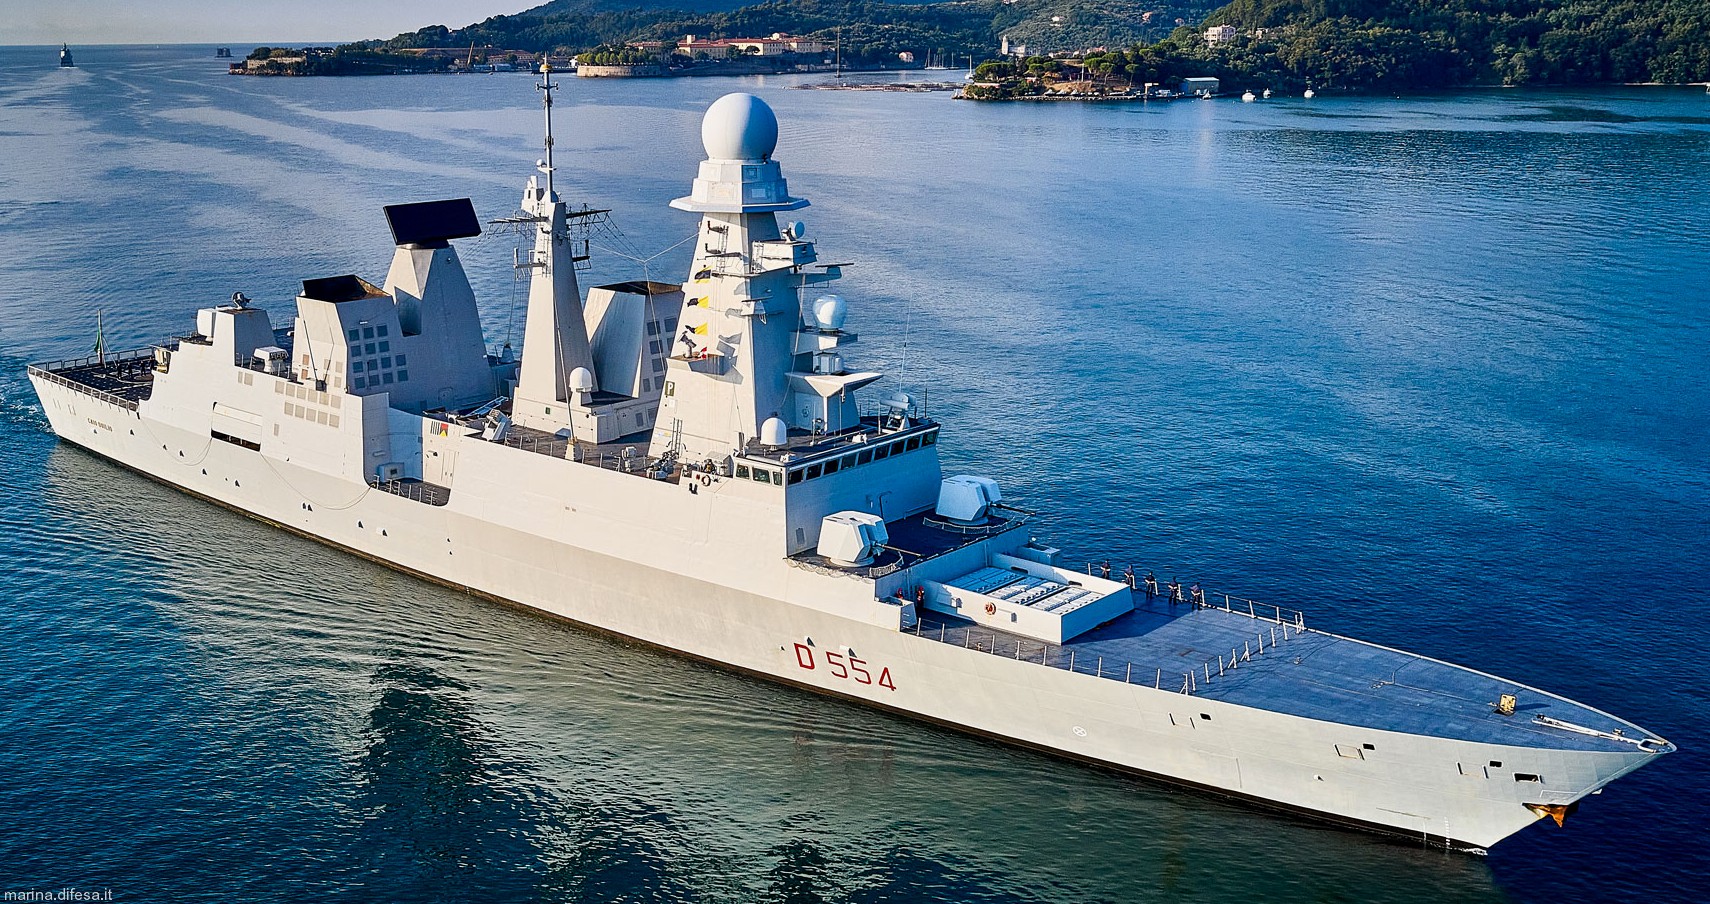 d-554 caio duilio its nave horizon class guided missile destroyer ddgh italian navy marina militare 40